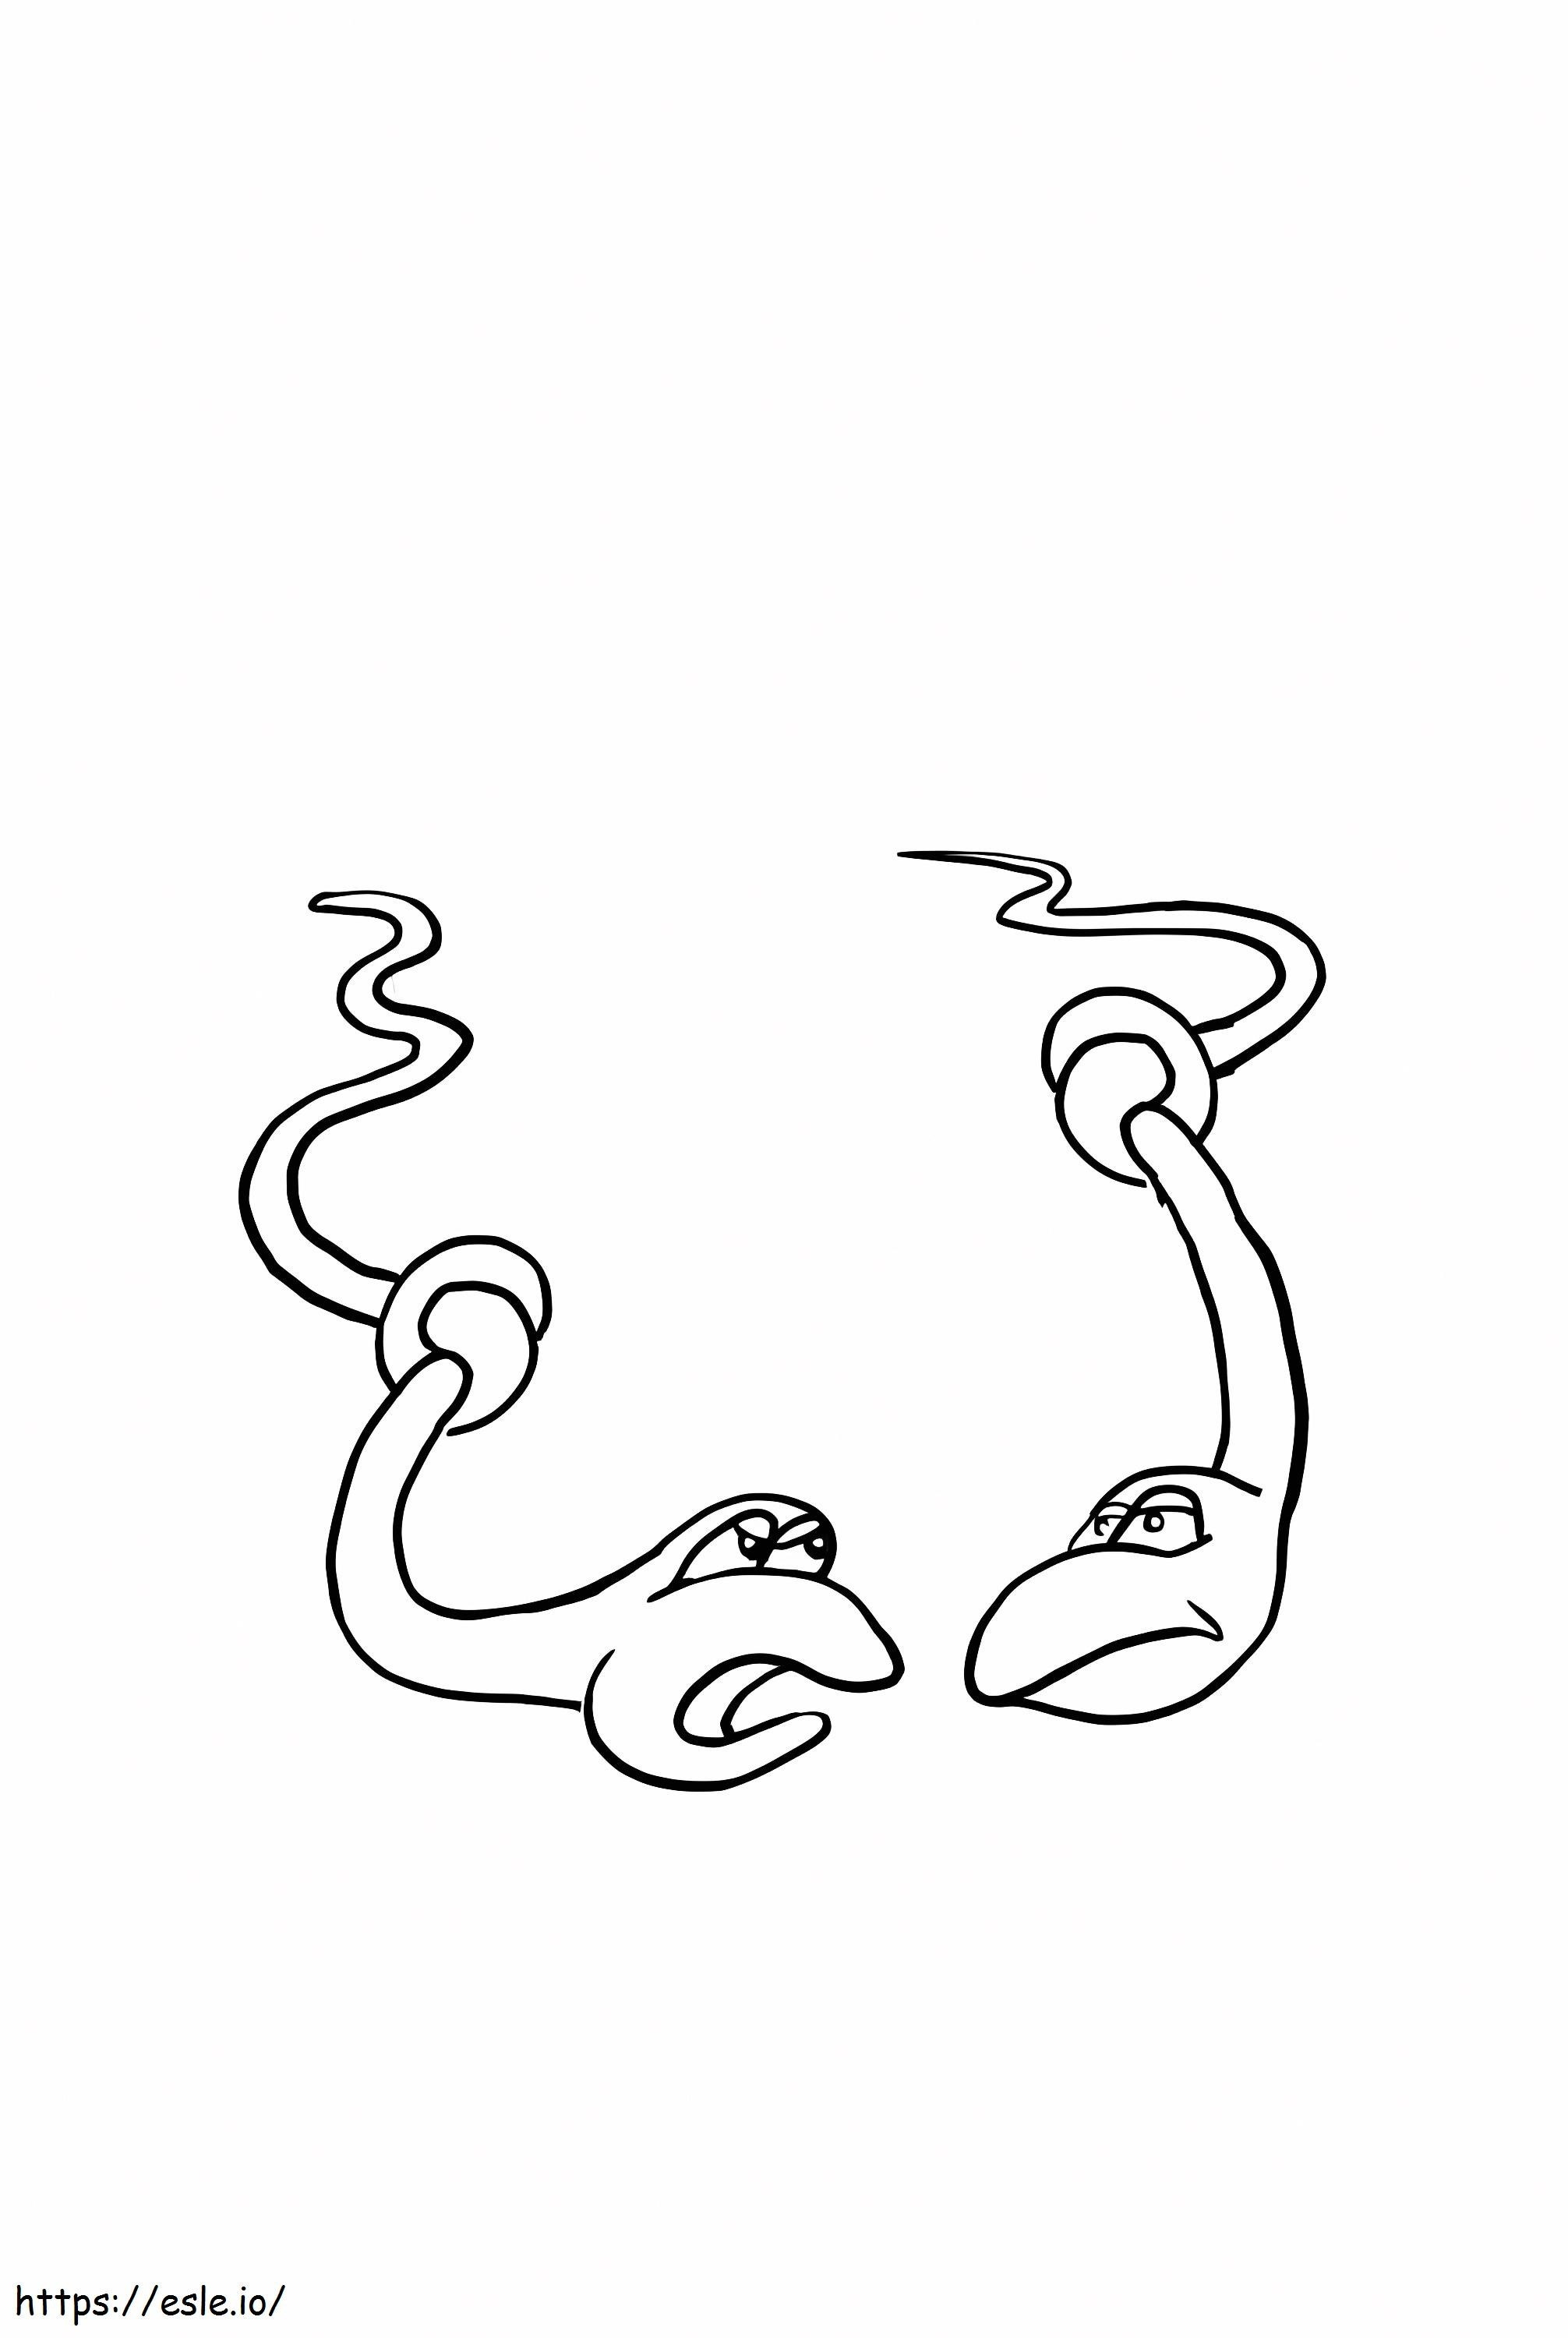 Two Little Snakes coloring page